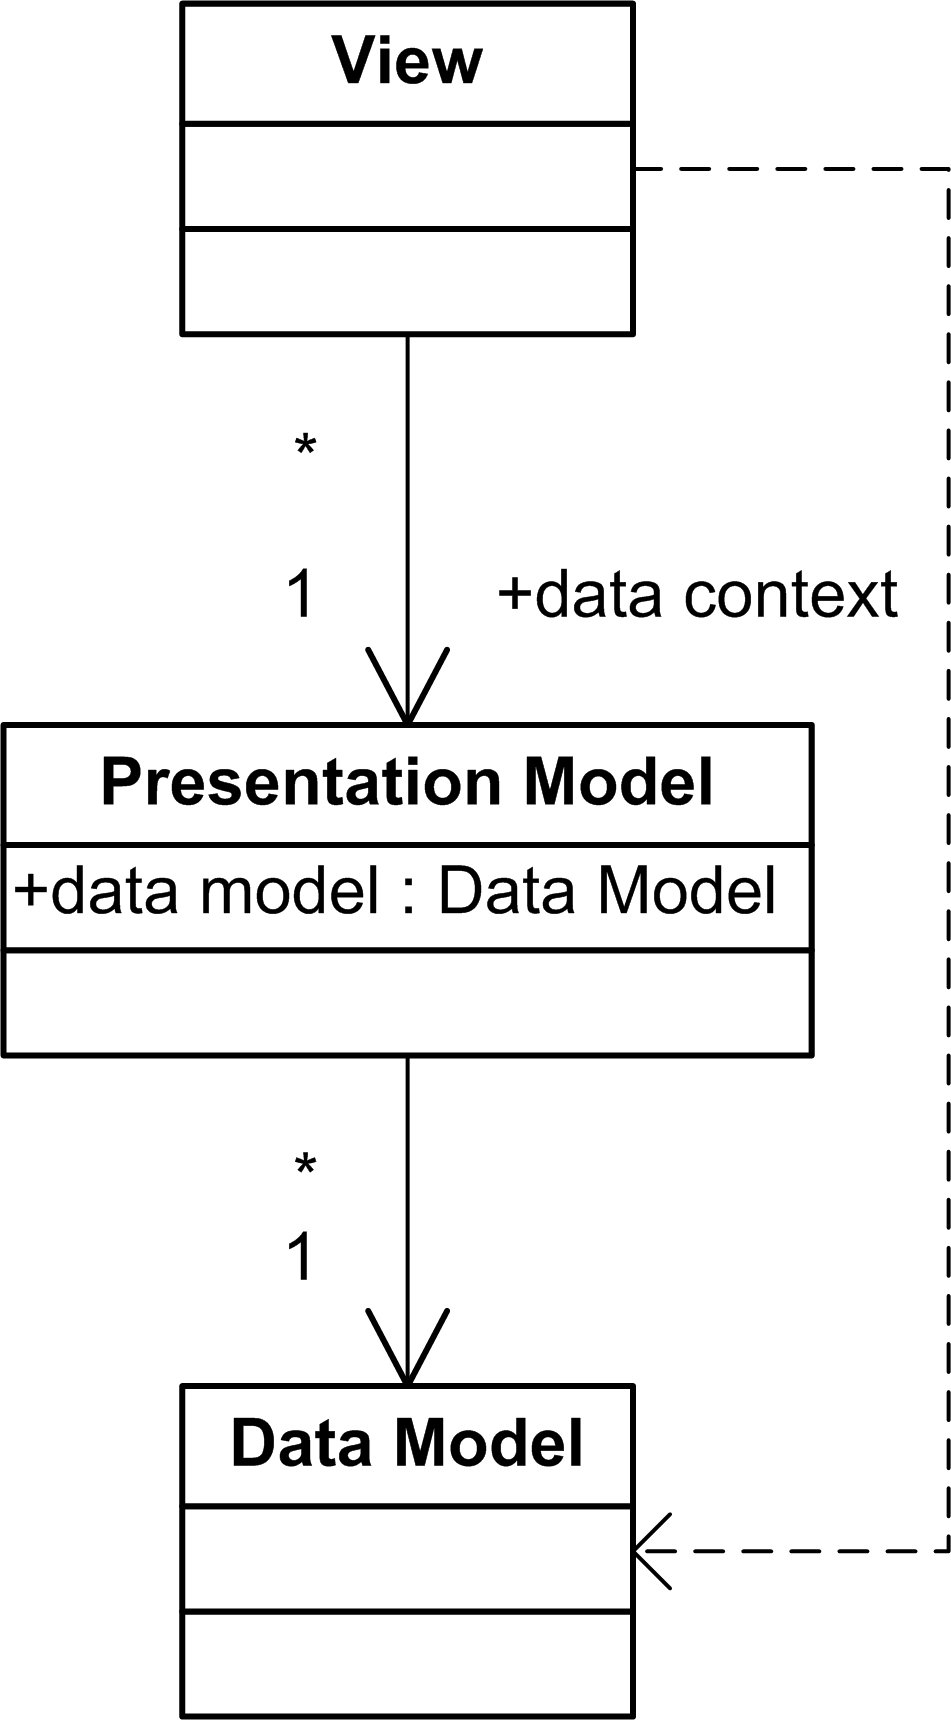 Figure 1: Structure diagram of the Presentation Model pattern. The view has direct access to the presentation model, and indirect access to the data mode.